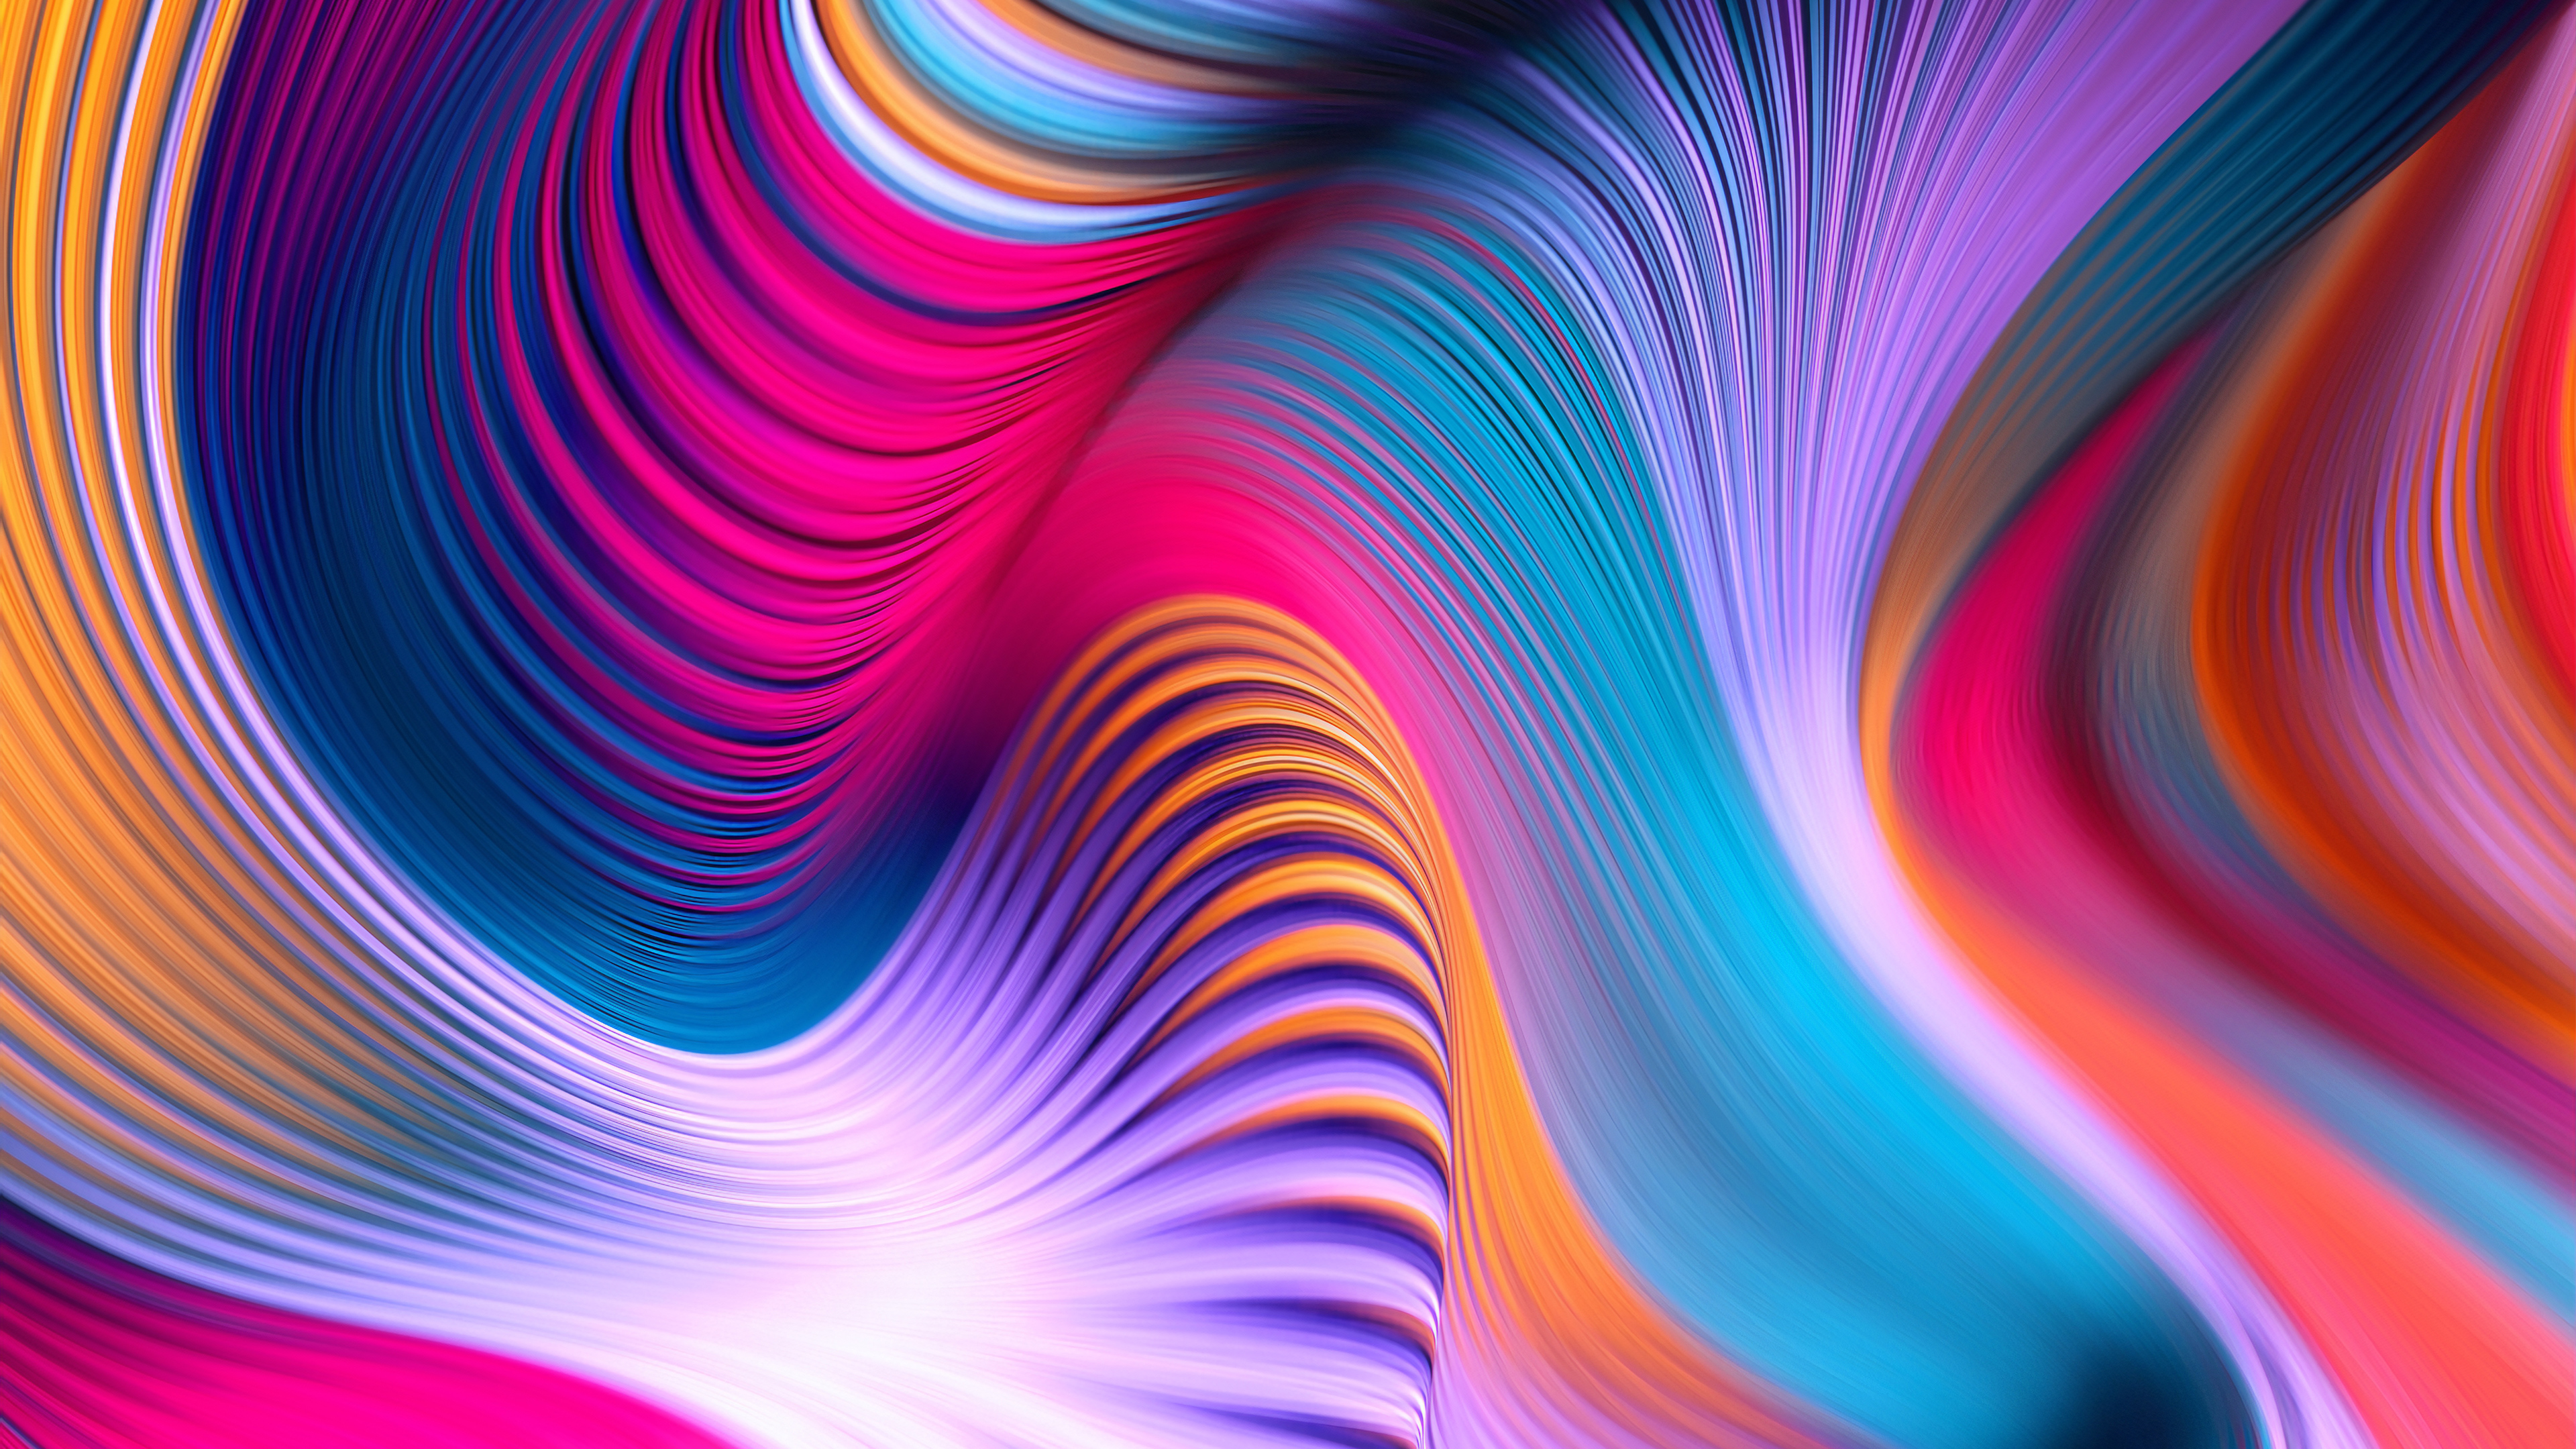 Abstract Colors 4k Ultra HD Wallpaper Background Image